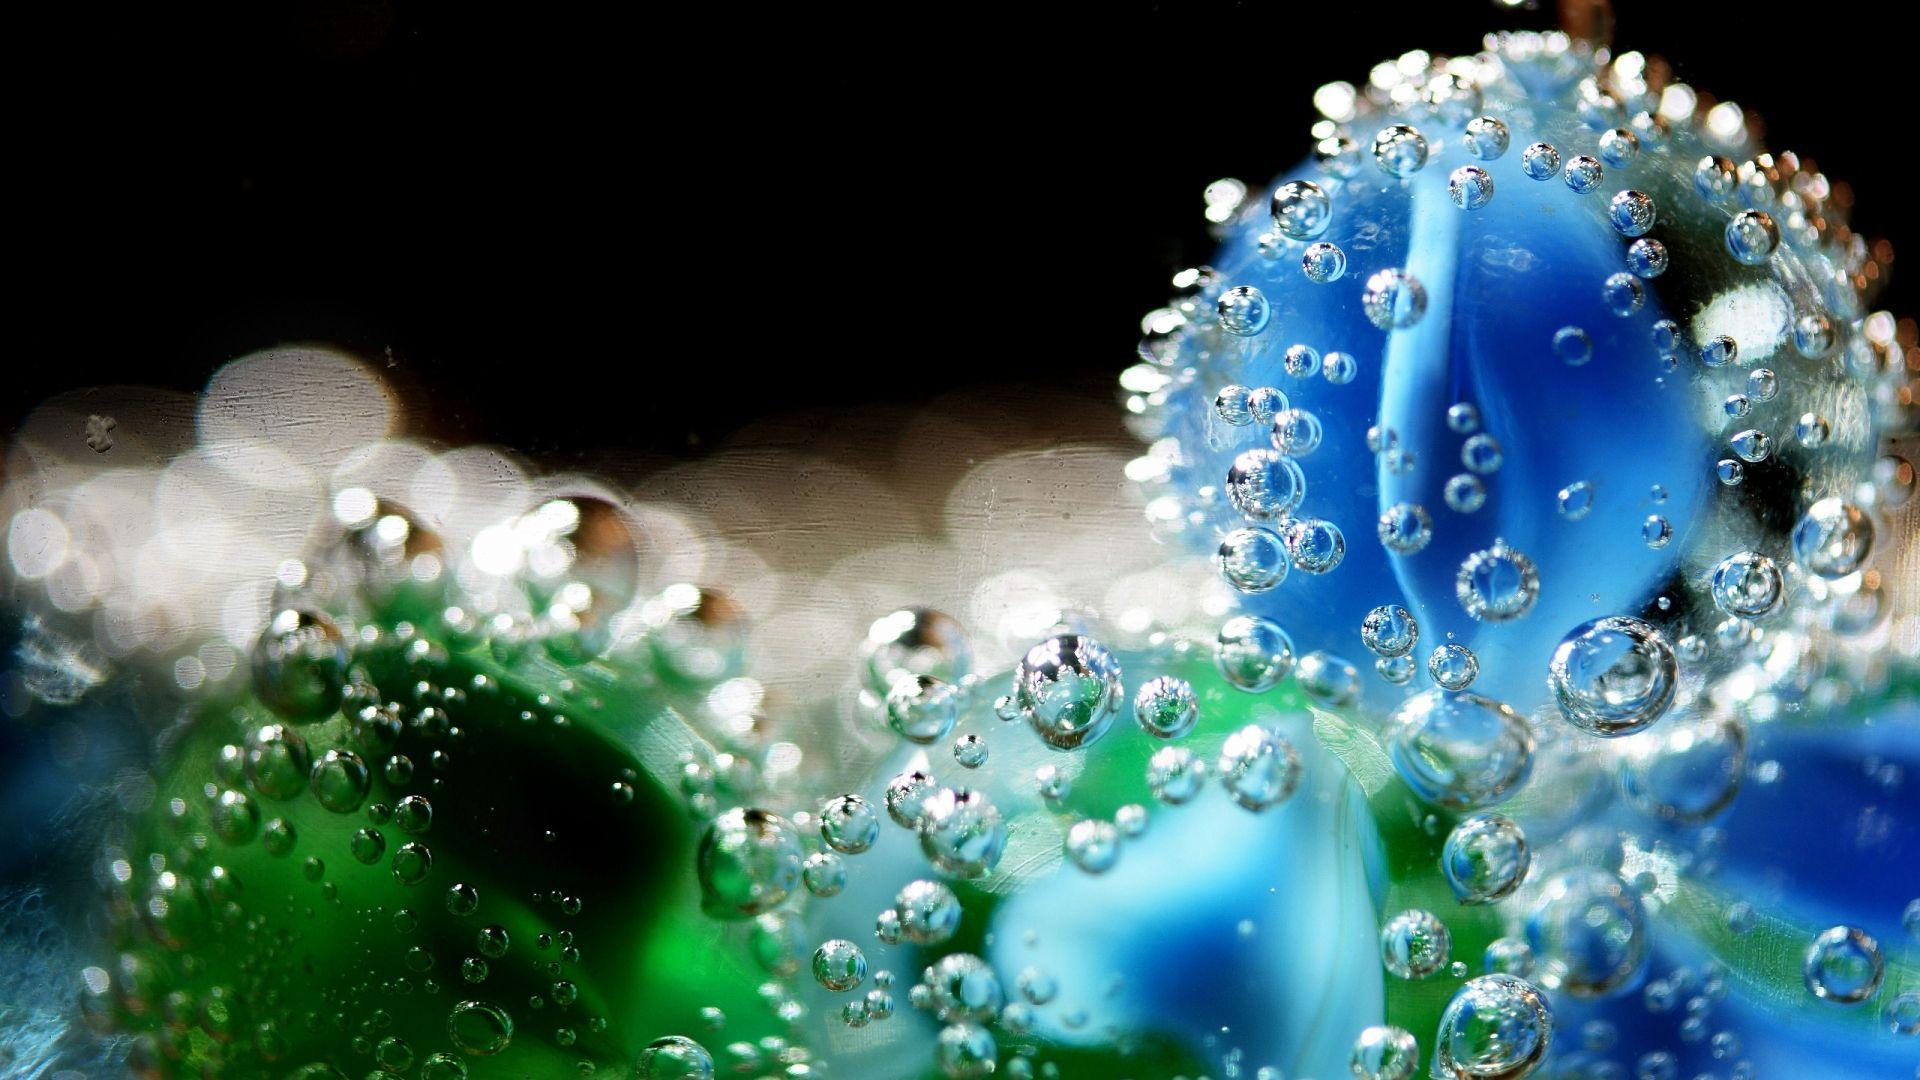 Water Drops 26145 1920x1080 px